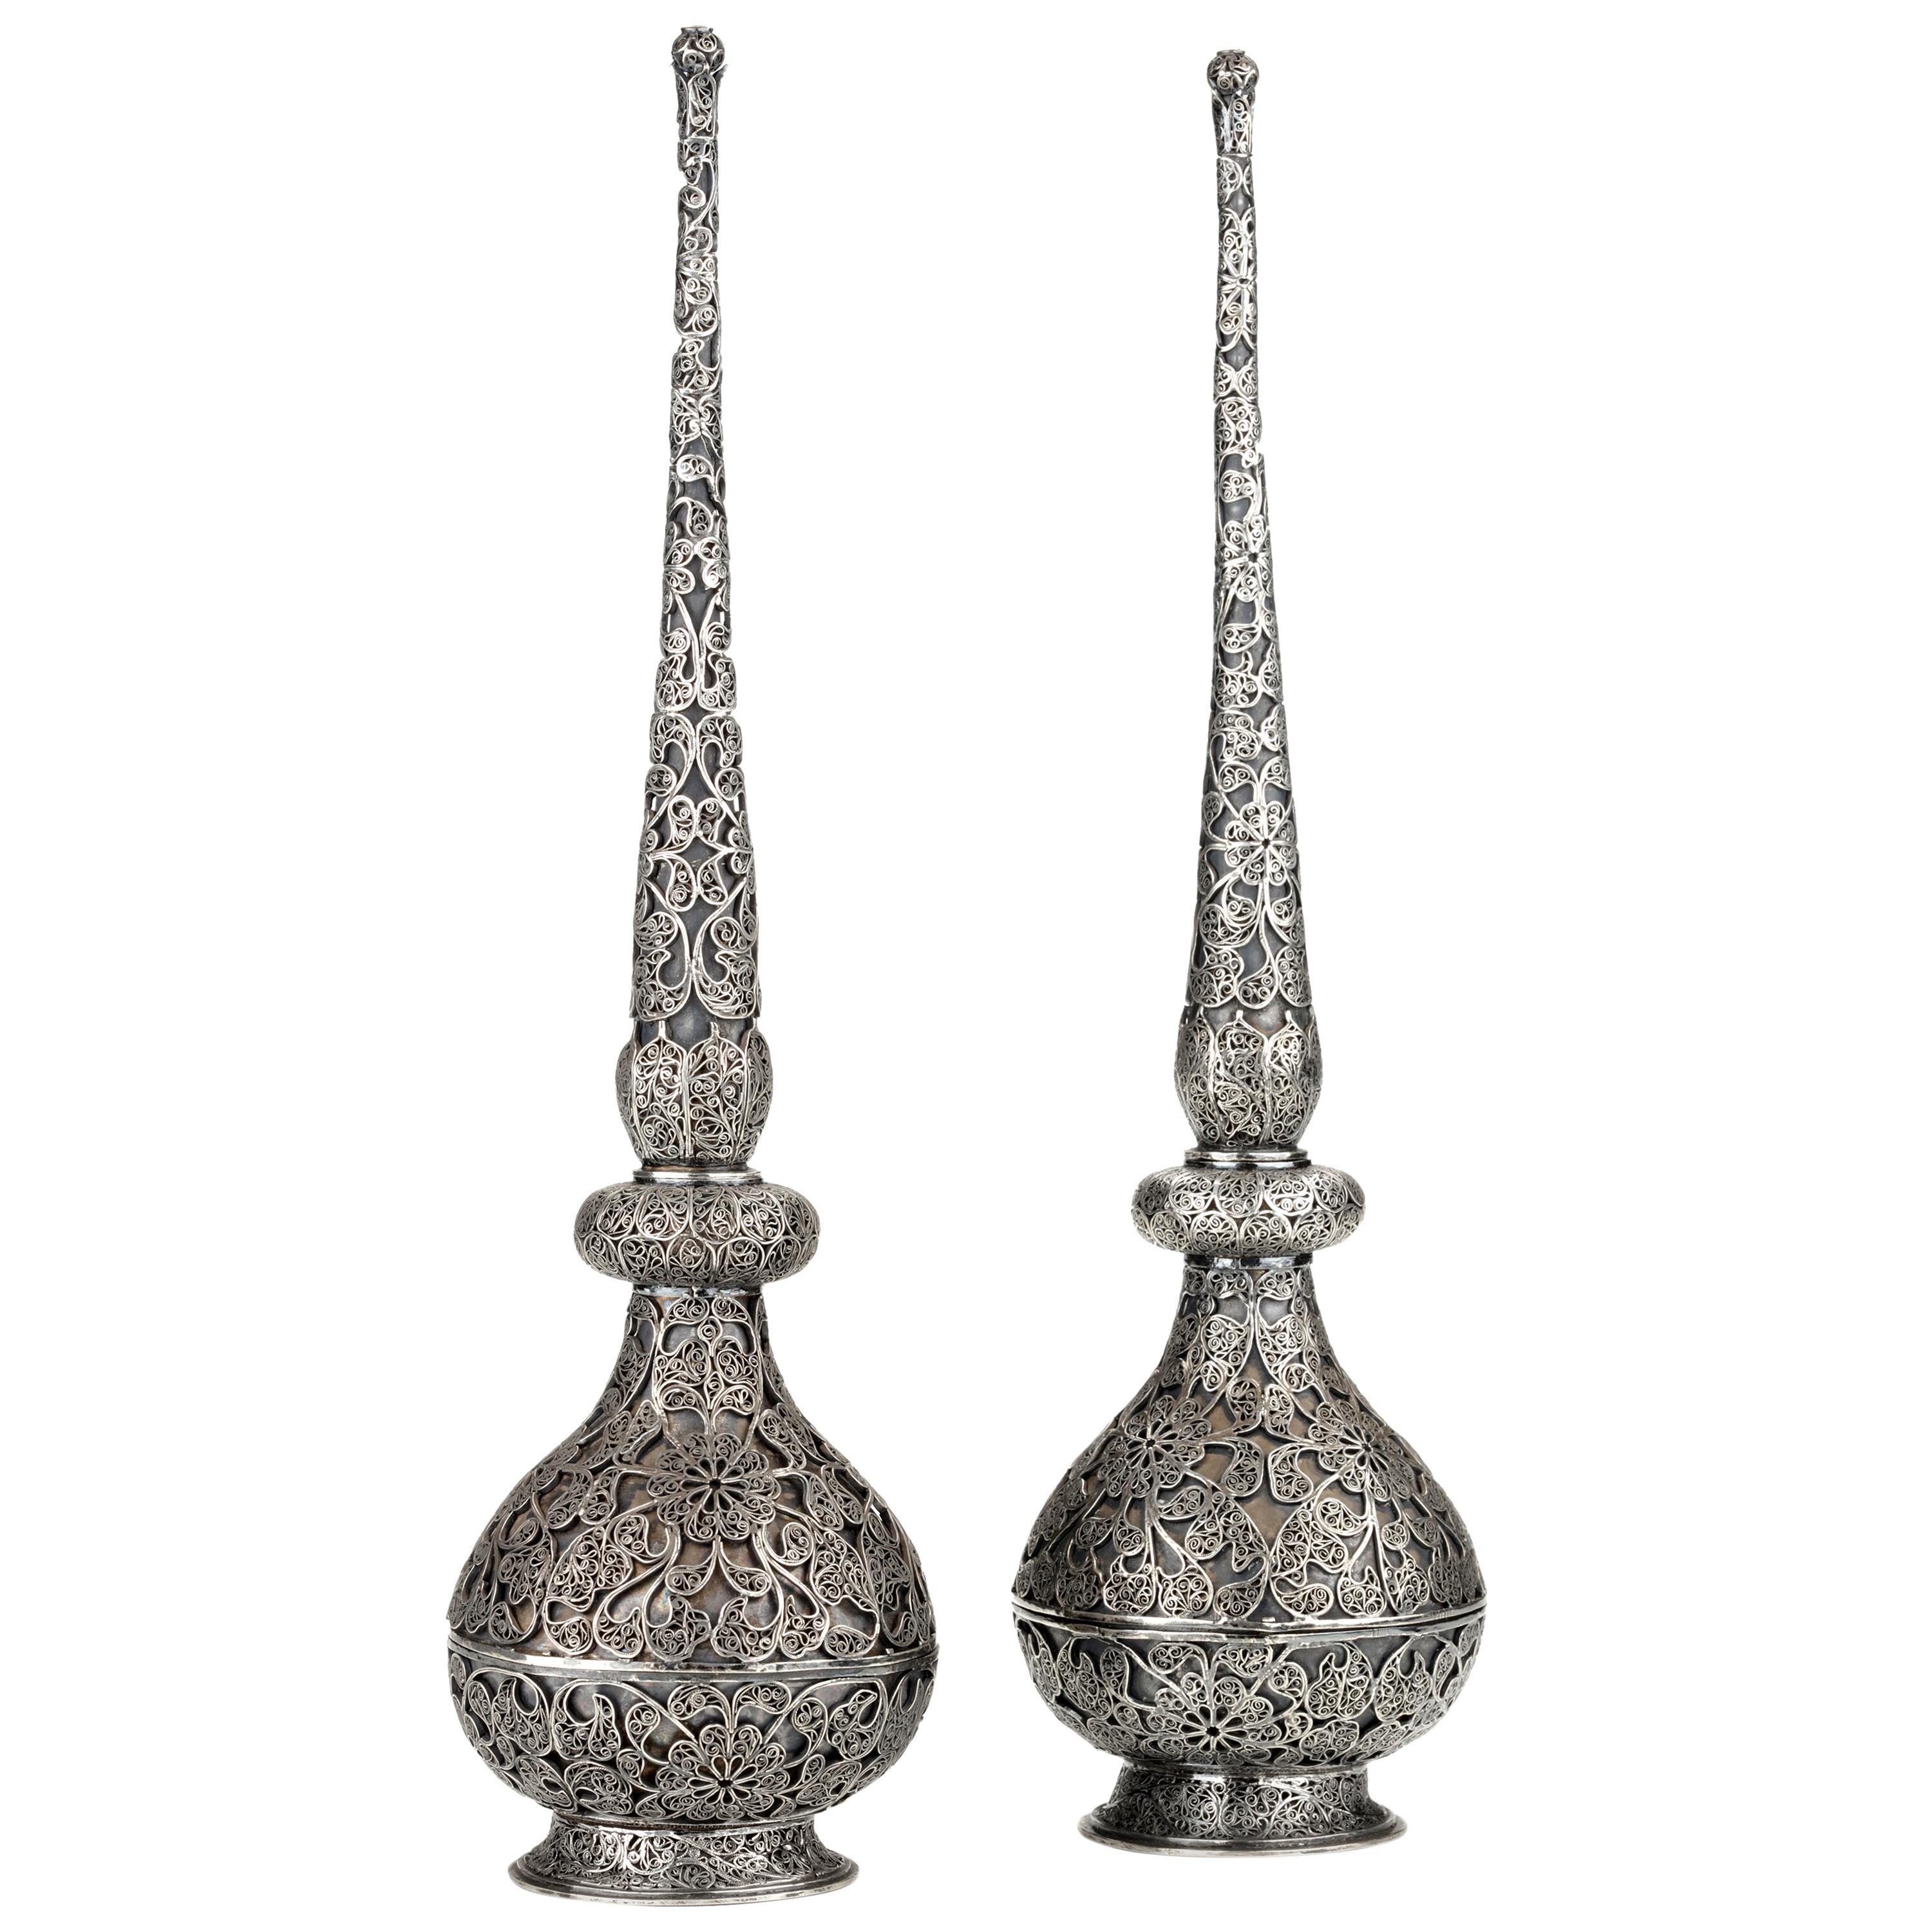 Pair of Fine Islamic Silver Filigree Rosewater Sprinklers, Early 18th Century